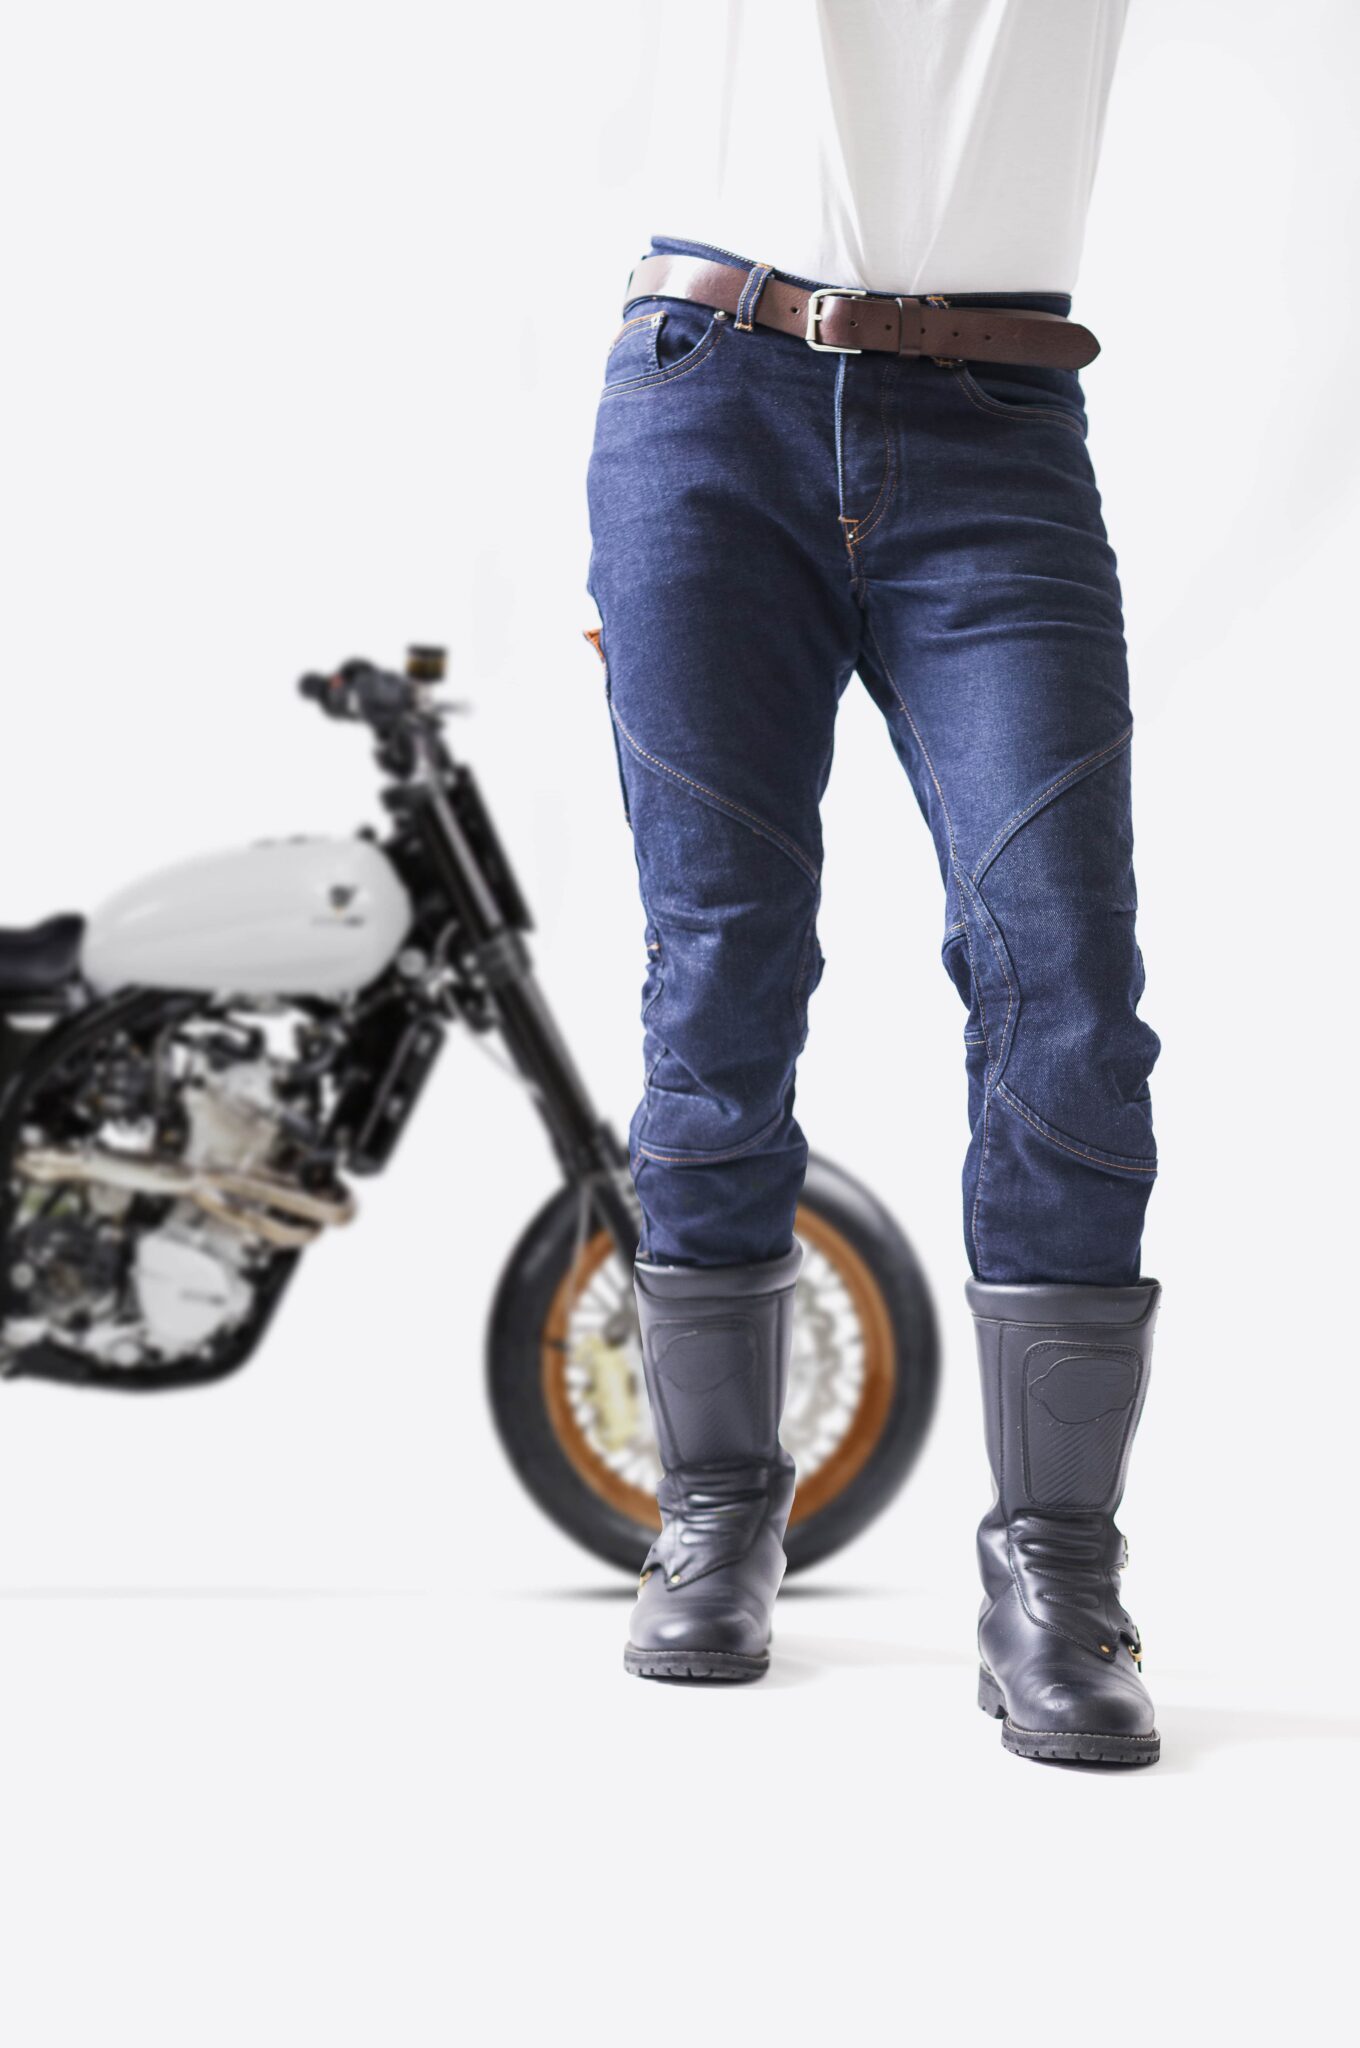 RIDE'STER SKIN - Jeans moto homme - BOLID'STER